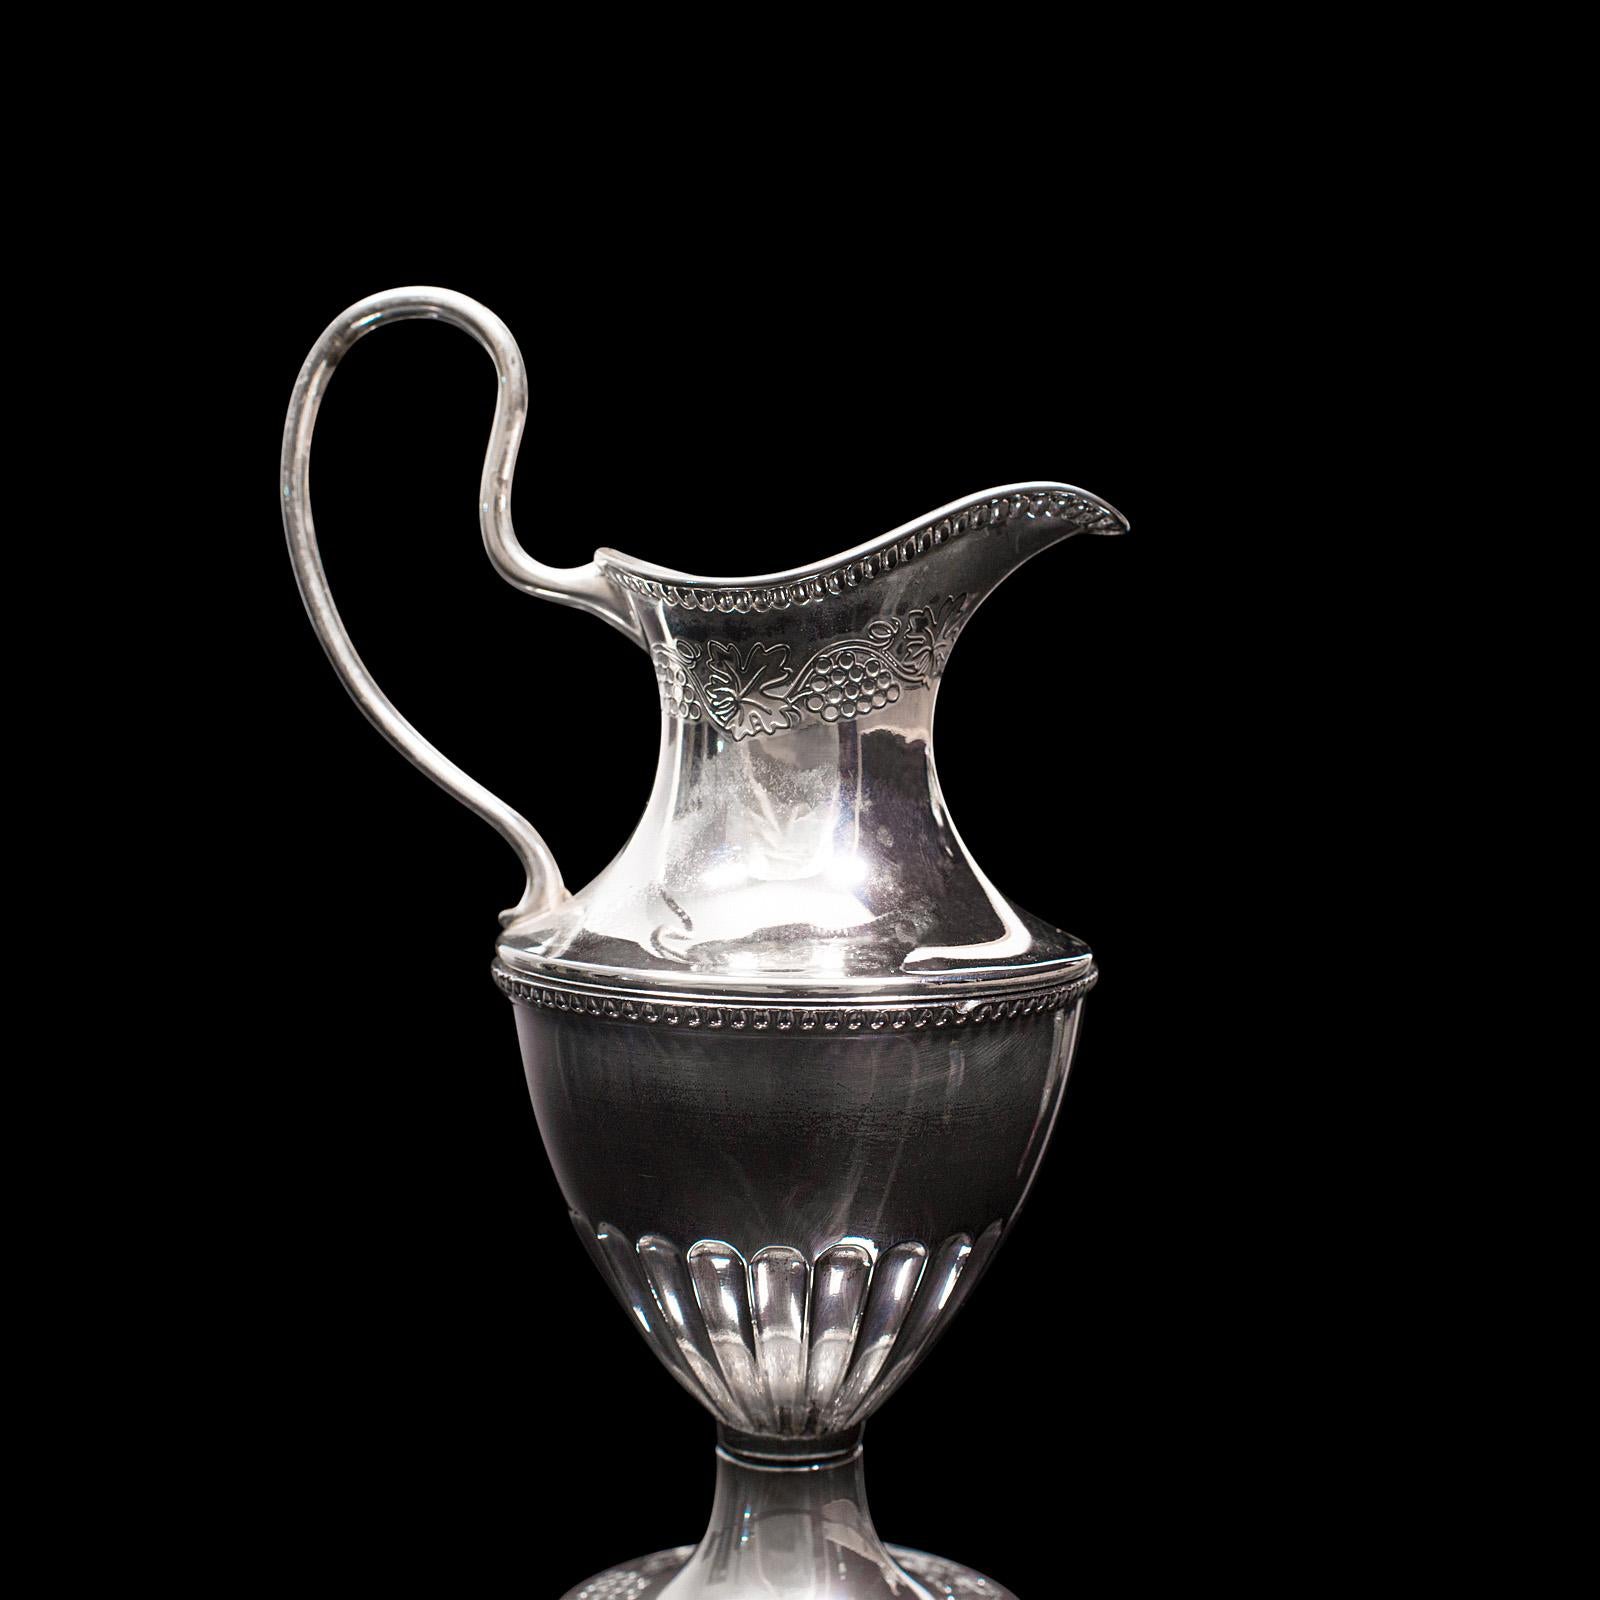 20th Century Antique Pouring Jug, English, Silver Plate, Decorative, Posy Vase, Edwardian For Sale